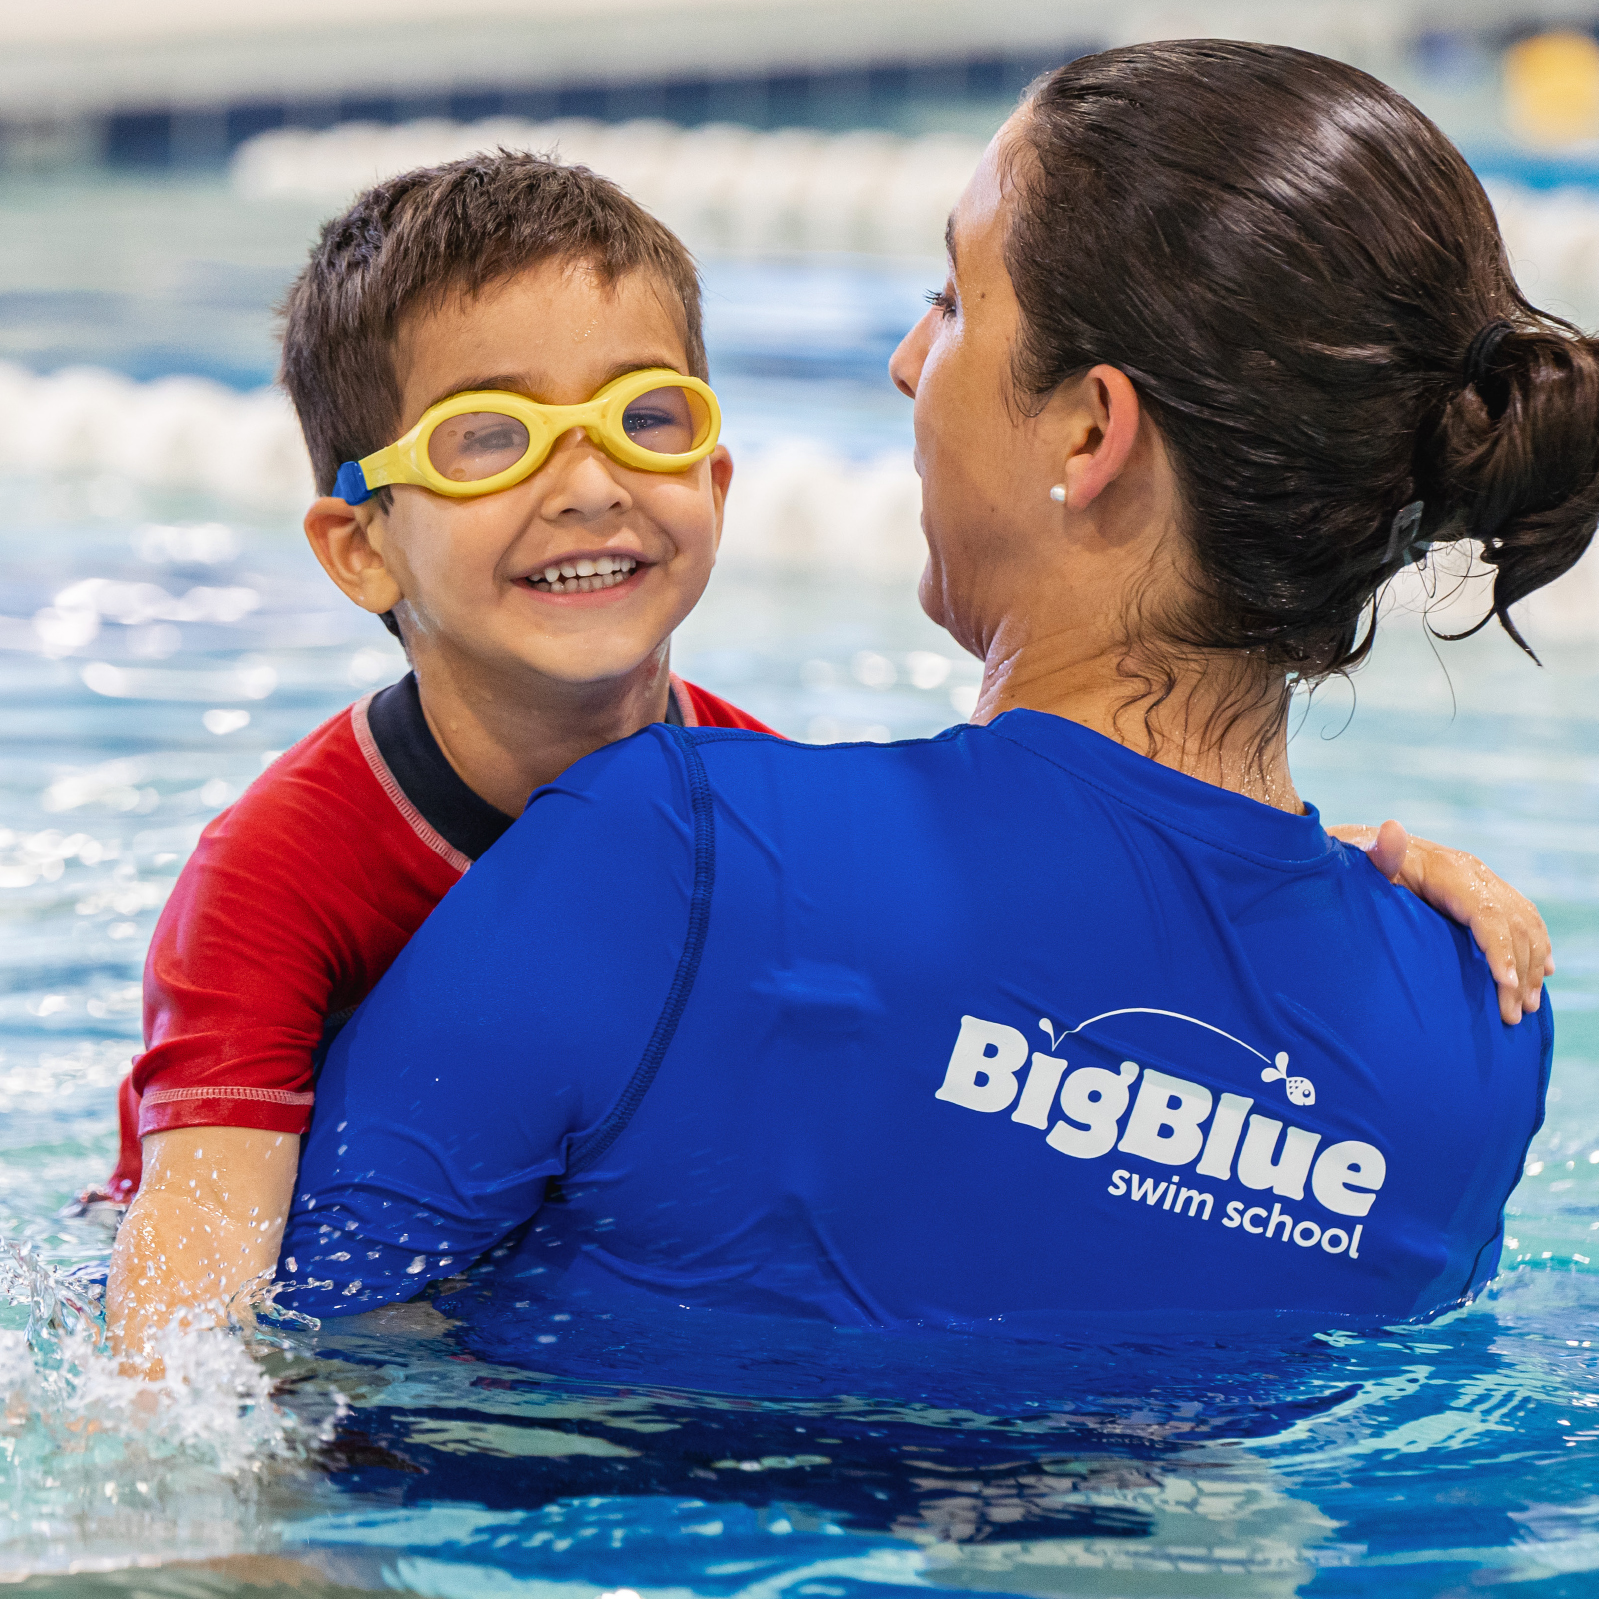 Big Blue Swim School is coming to Northern Virginia with pools in Chantilly, Falls Church, Fairfax, and Dulles.